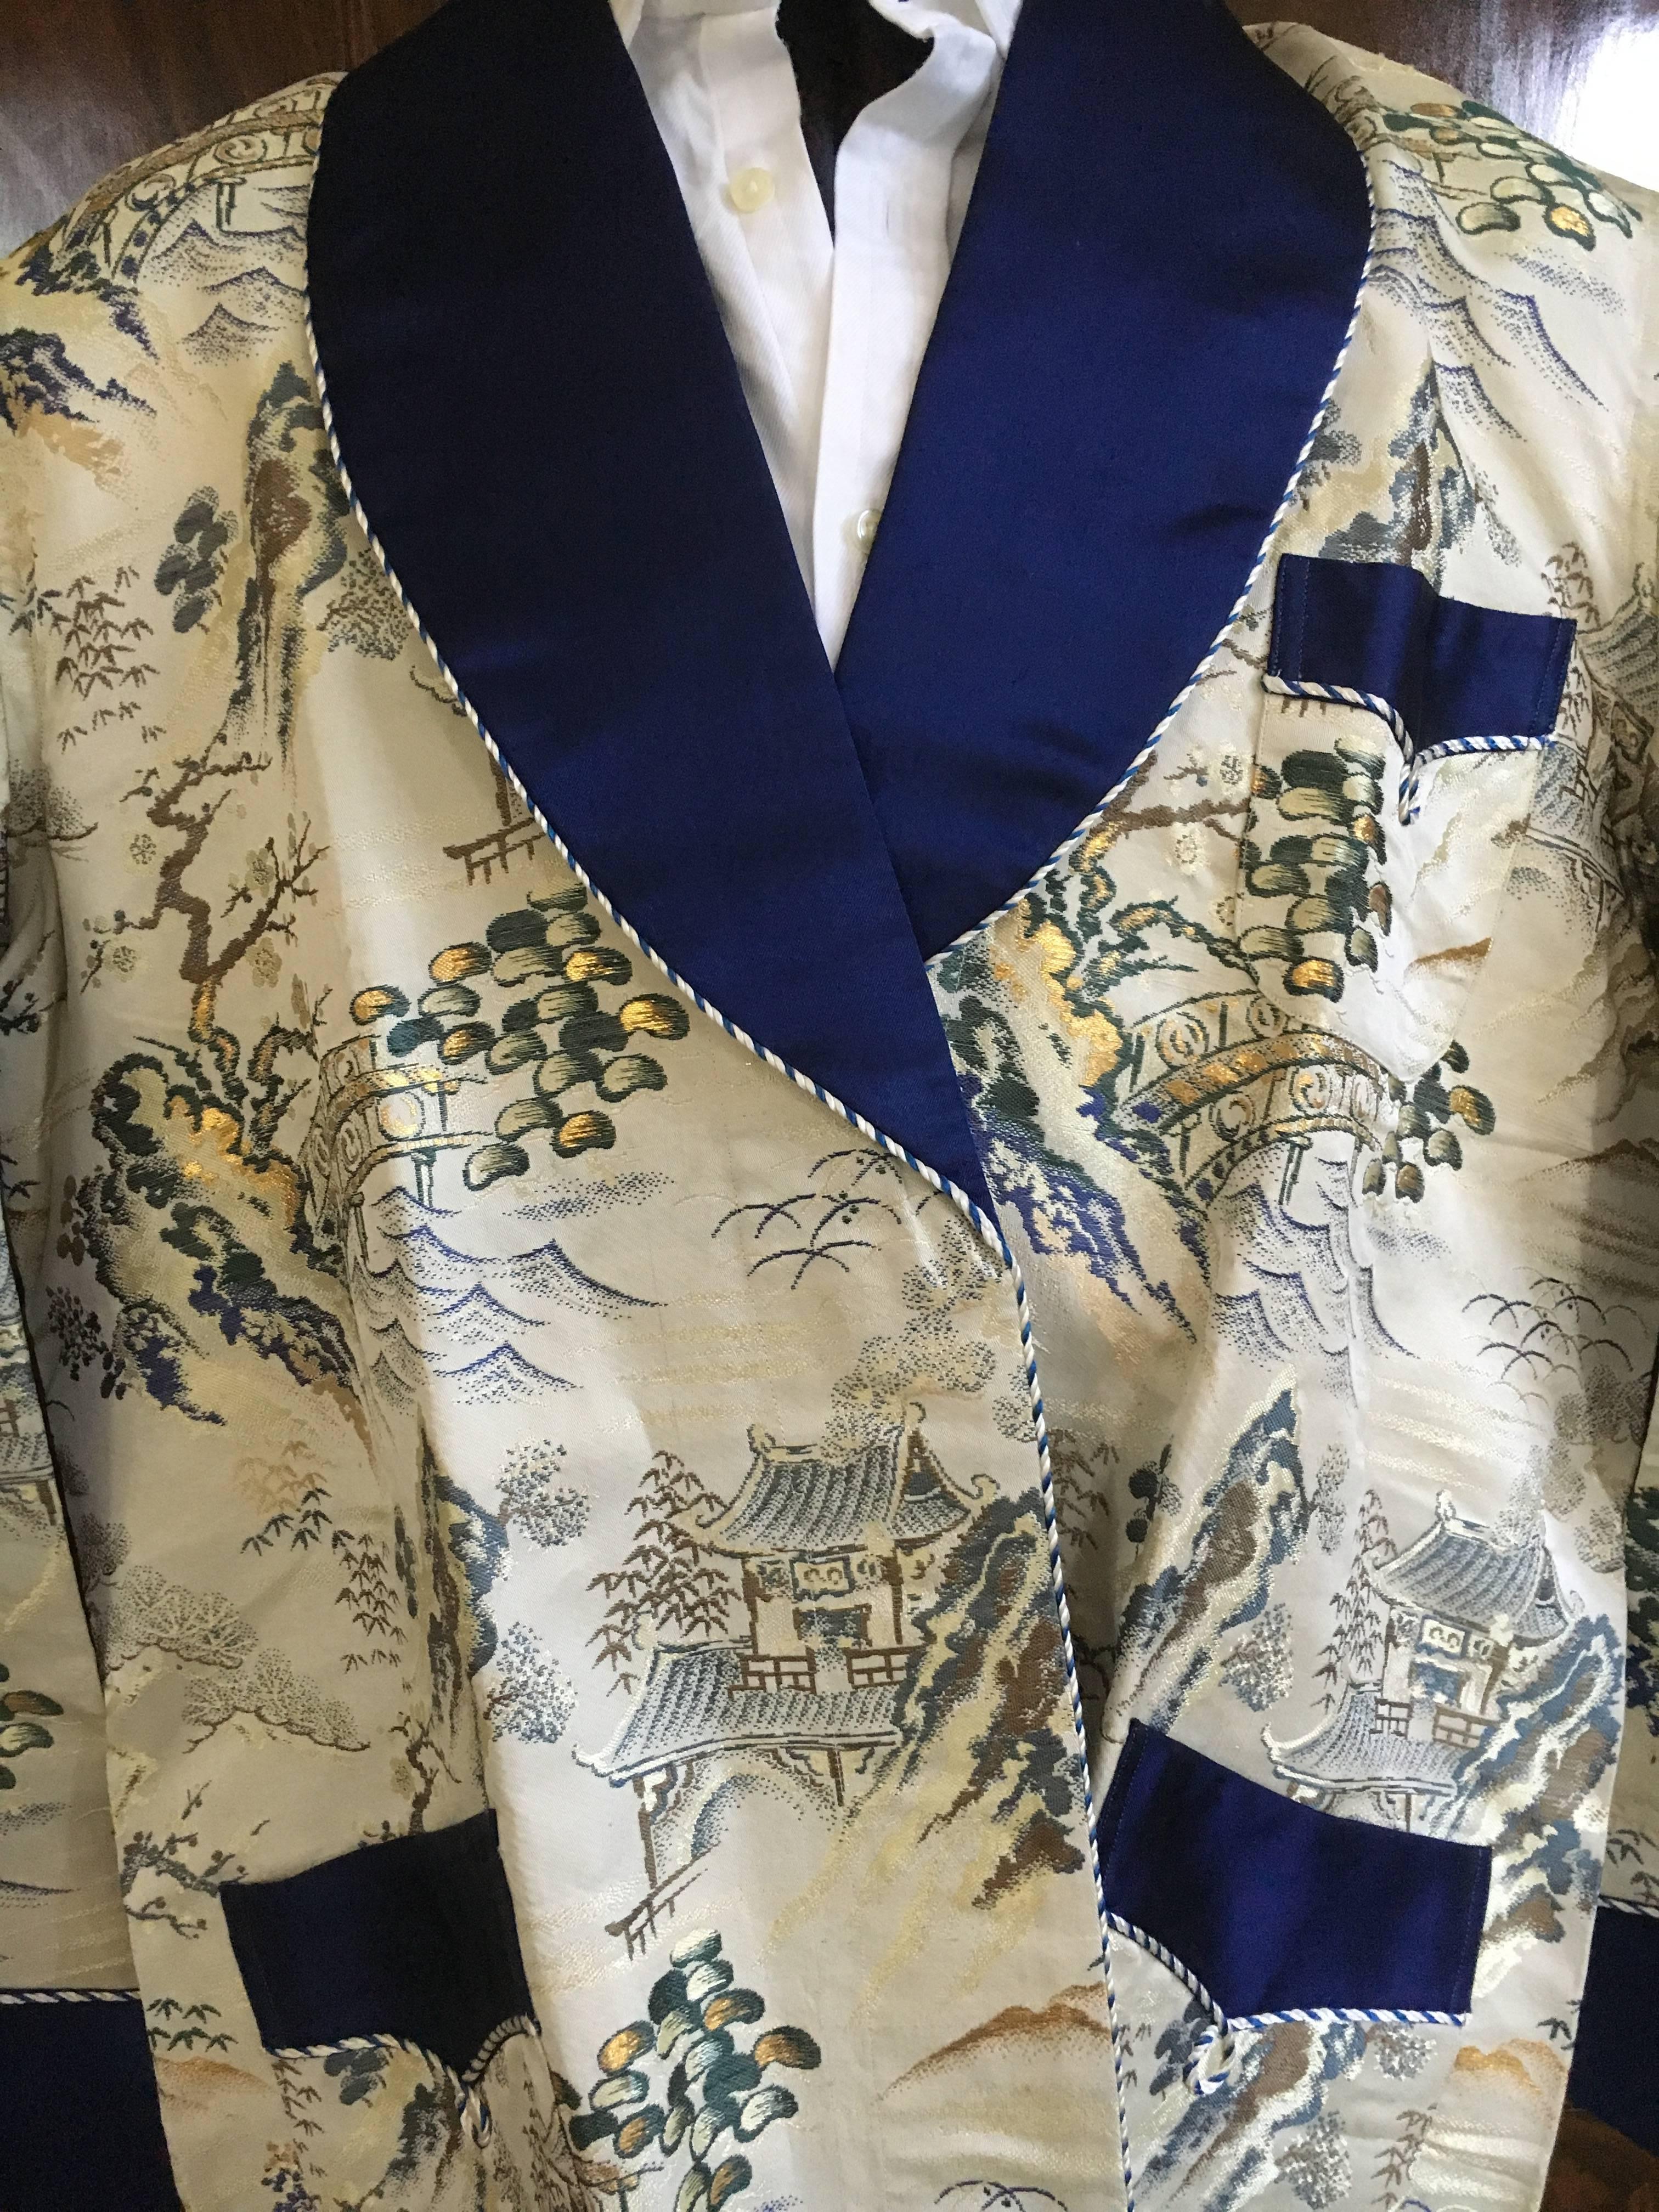 1950's Gentleman's Kimono Fabric Smoking Jacket Made in Japan .
See all the great vintage menswear and accessories in this collection.
Three generations of aristocratic living under one roof, amazing stuff.
Chest 44